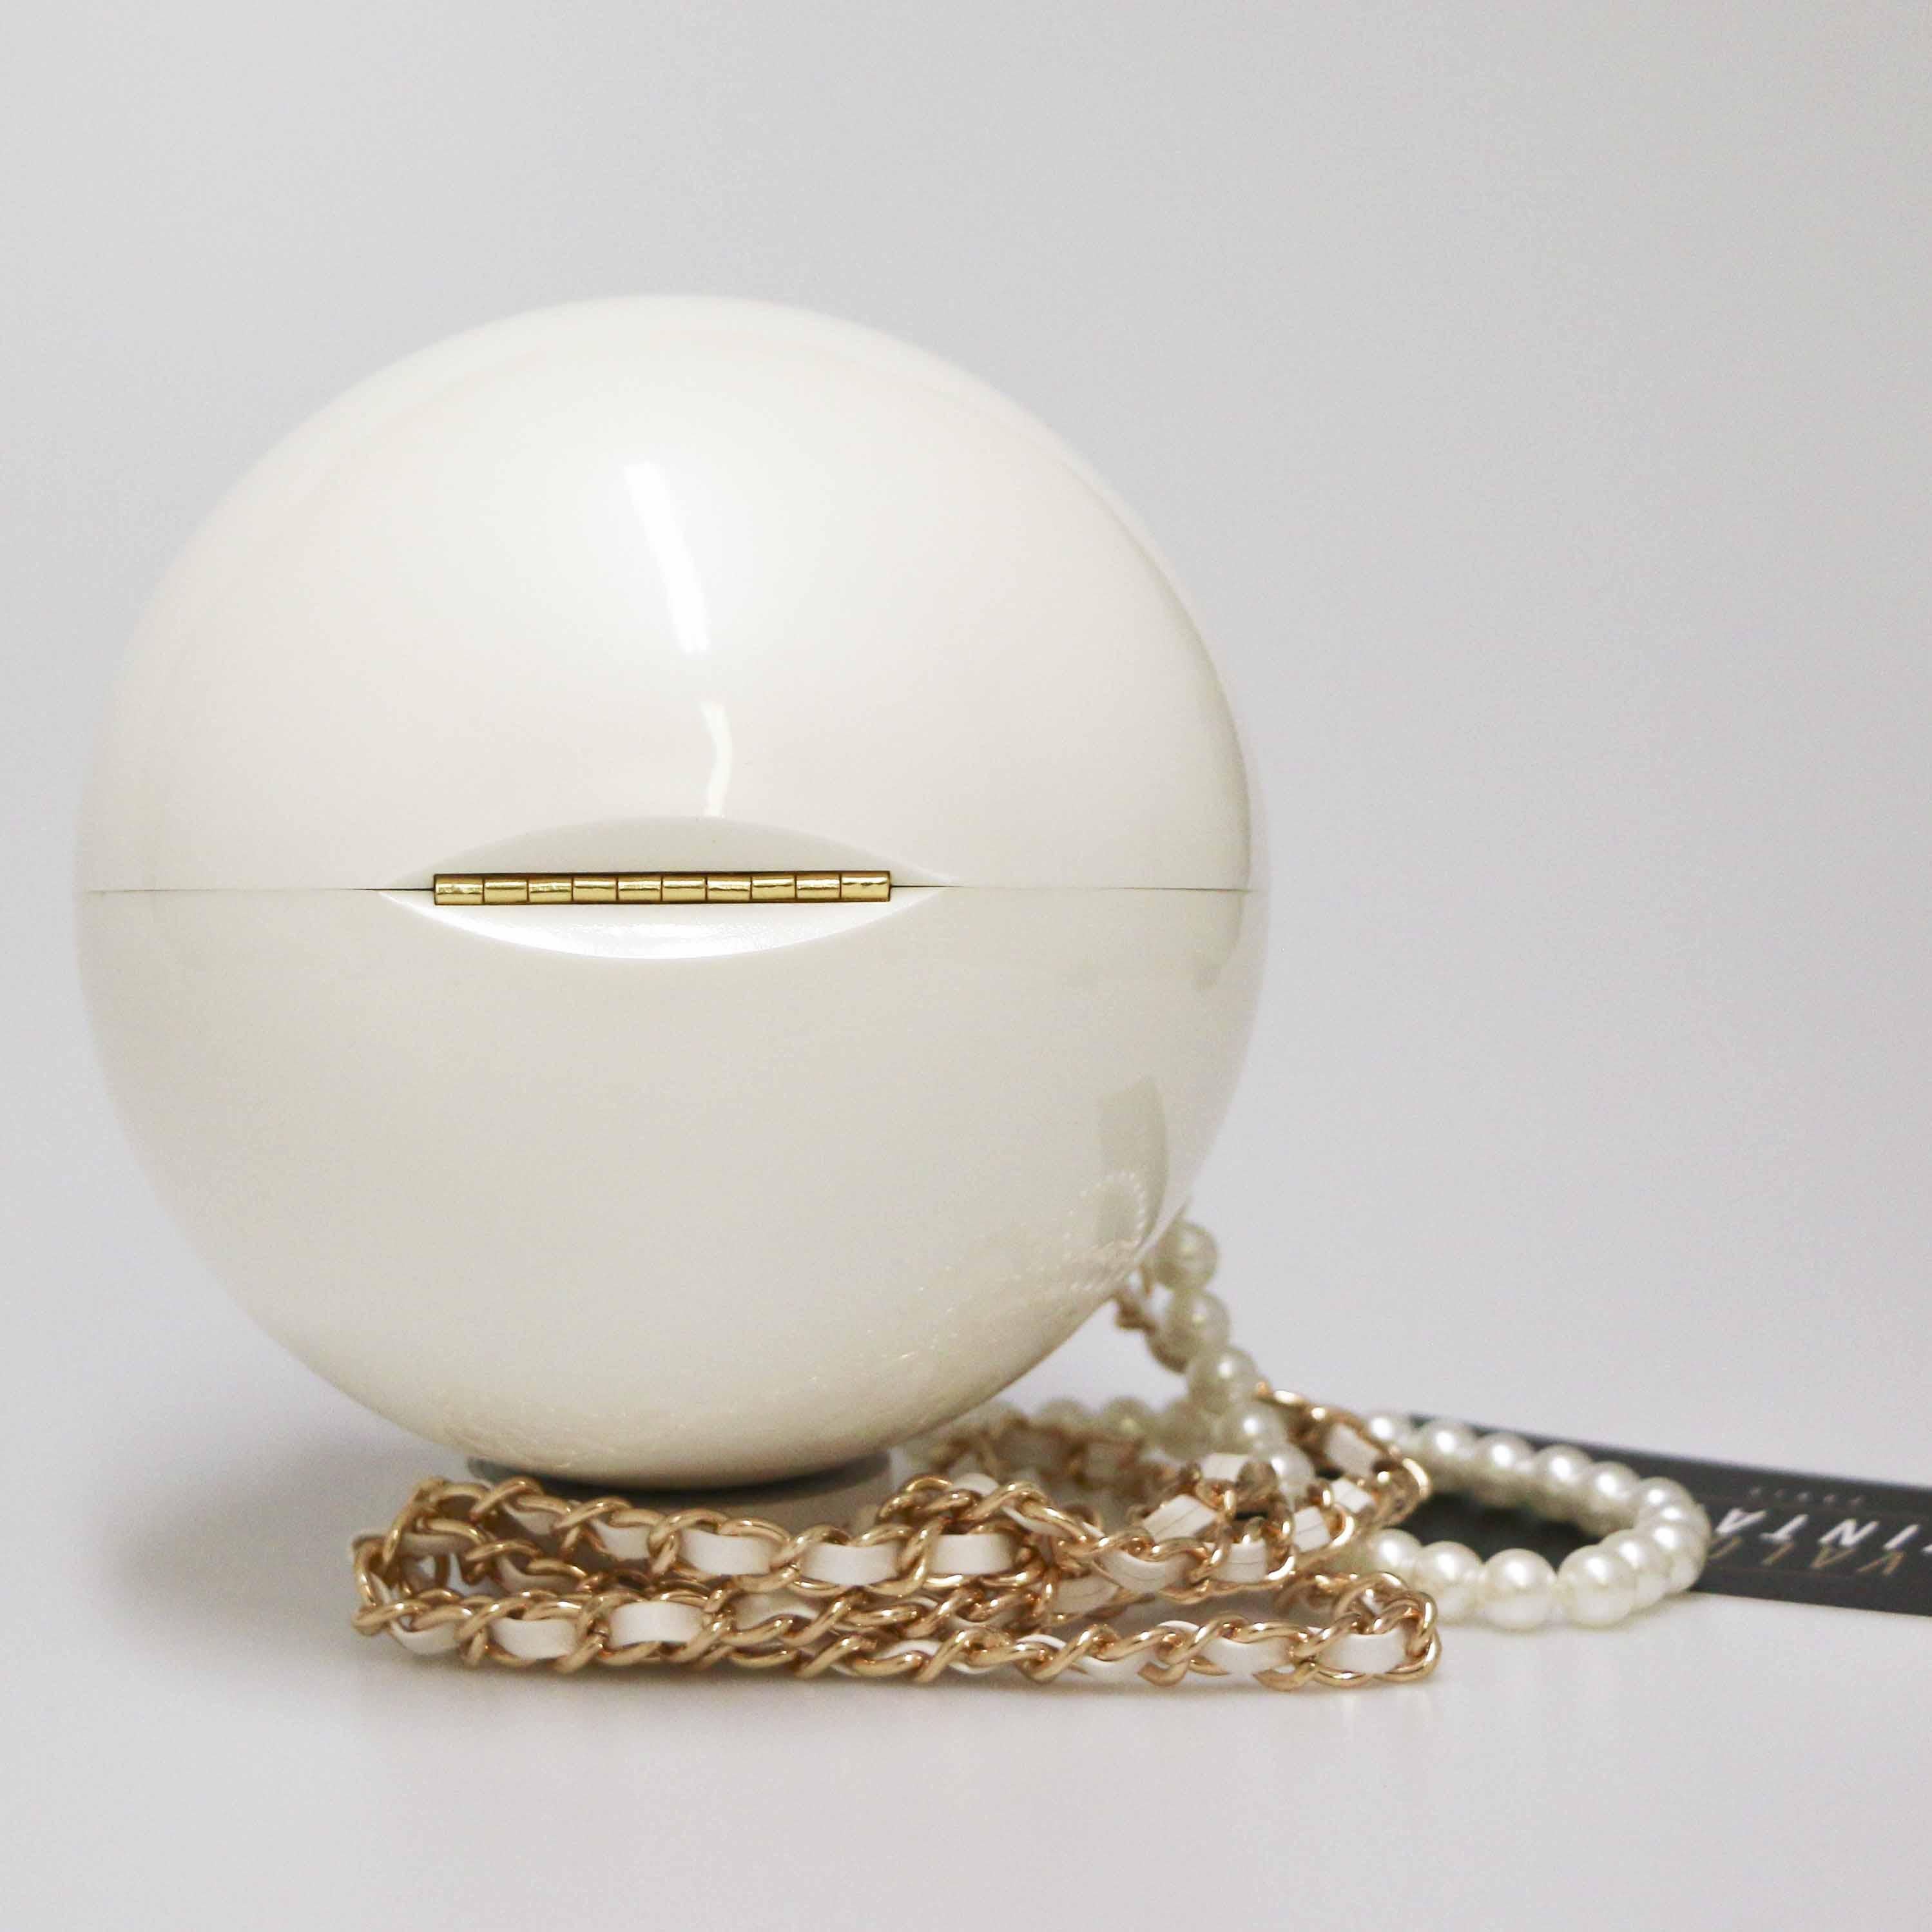 Beige CHANEL Sphere Bag with Pearl Strap